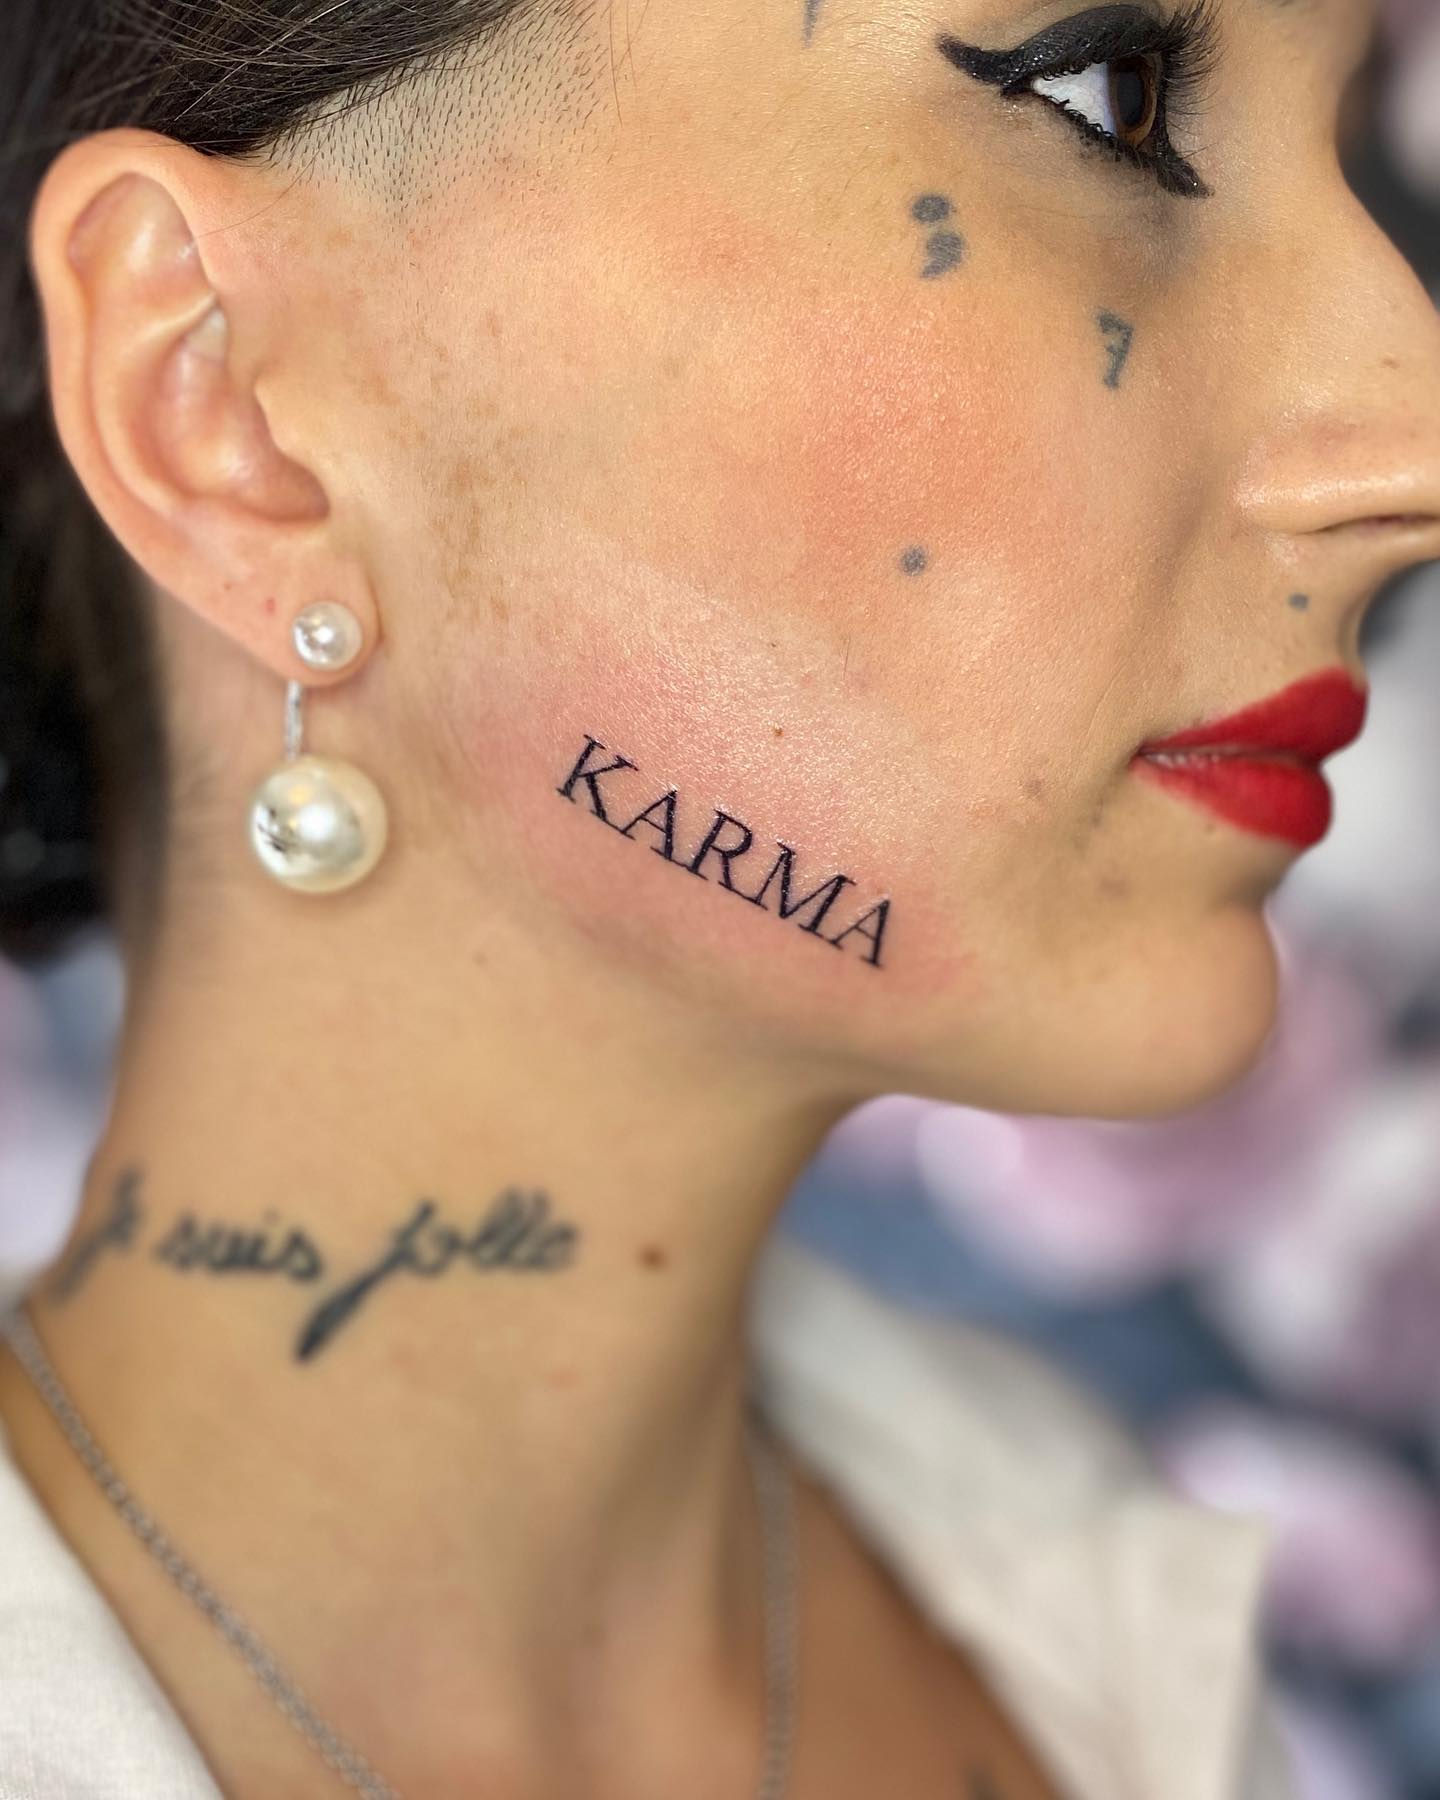 Let the world know and show that you believe that karma is a bitch. Women who are in their twenties tend to go for this cool and bold (pretty straightforward) tattoo design.